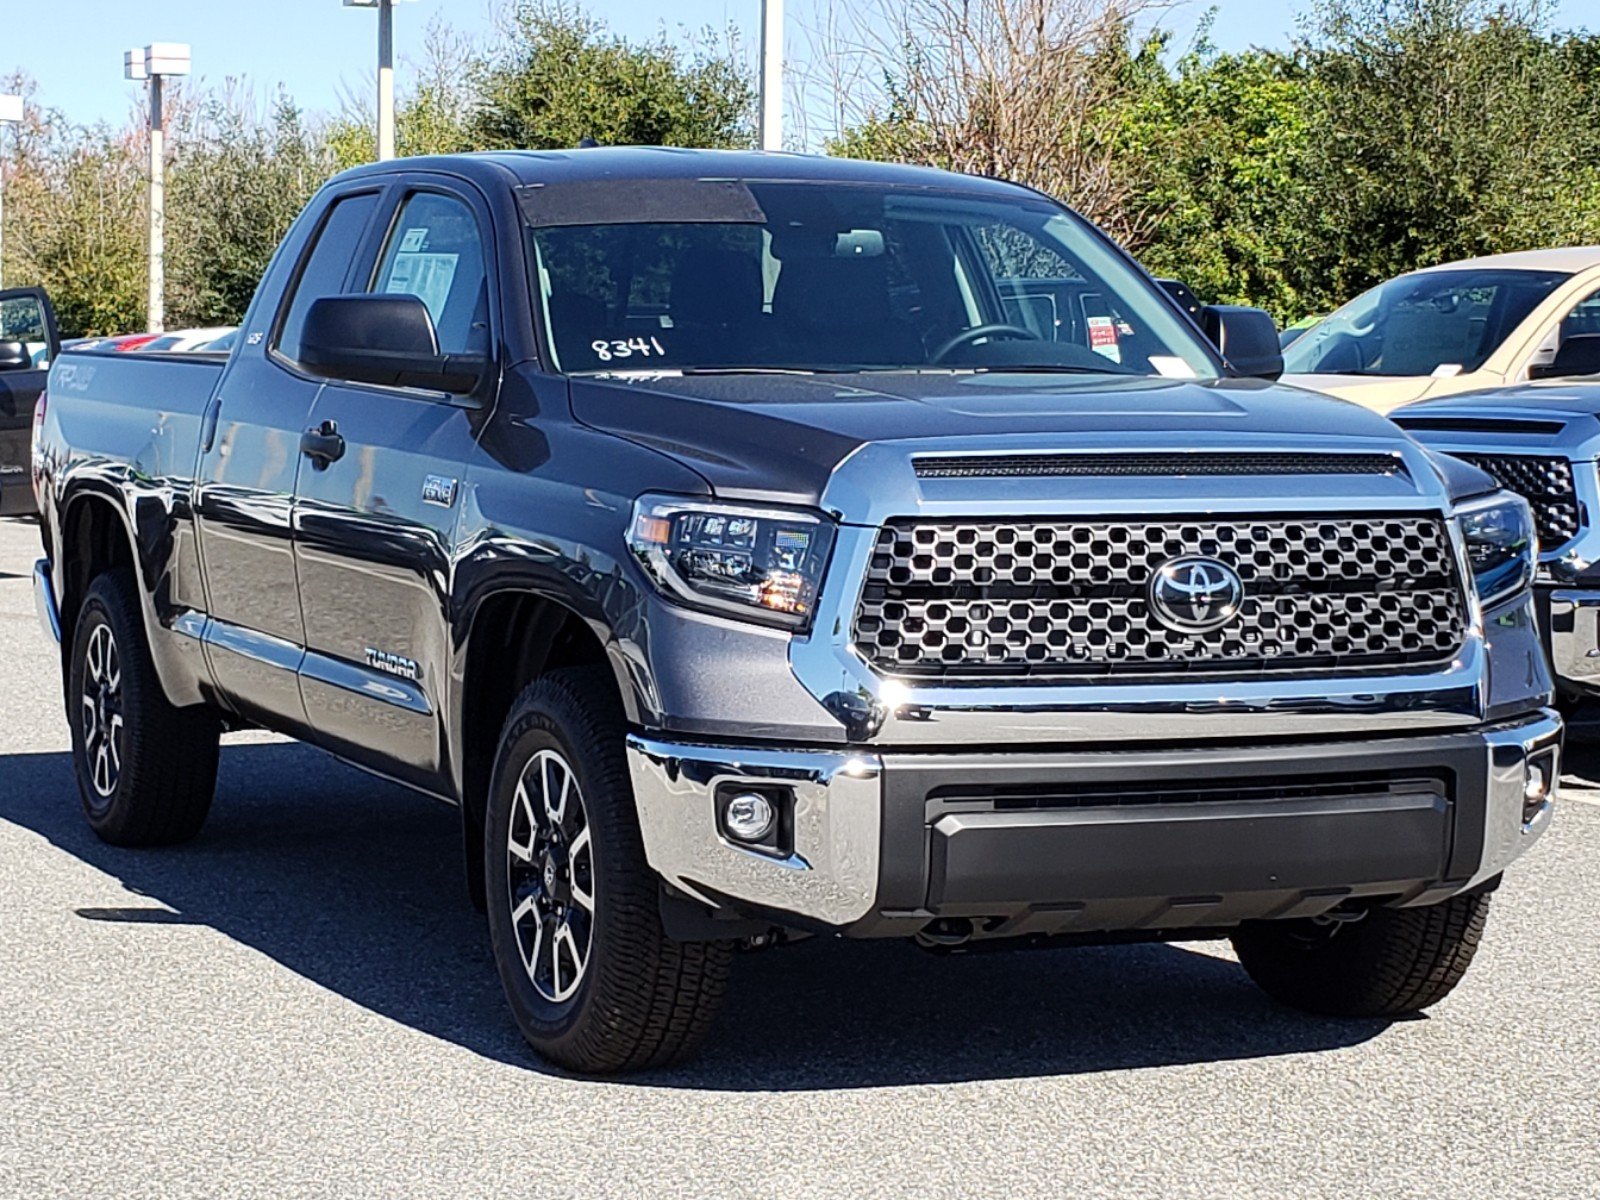 New 2020 Toyota Tundra SR5 Double Cab in Orlando #0830046 | Toyota of